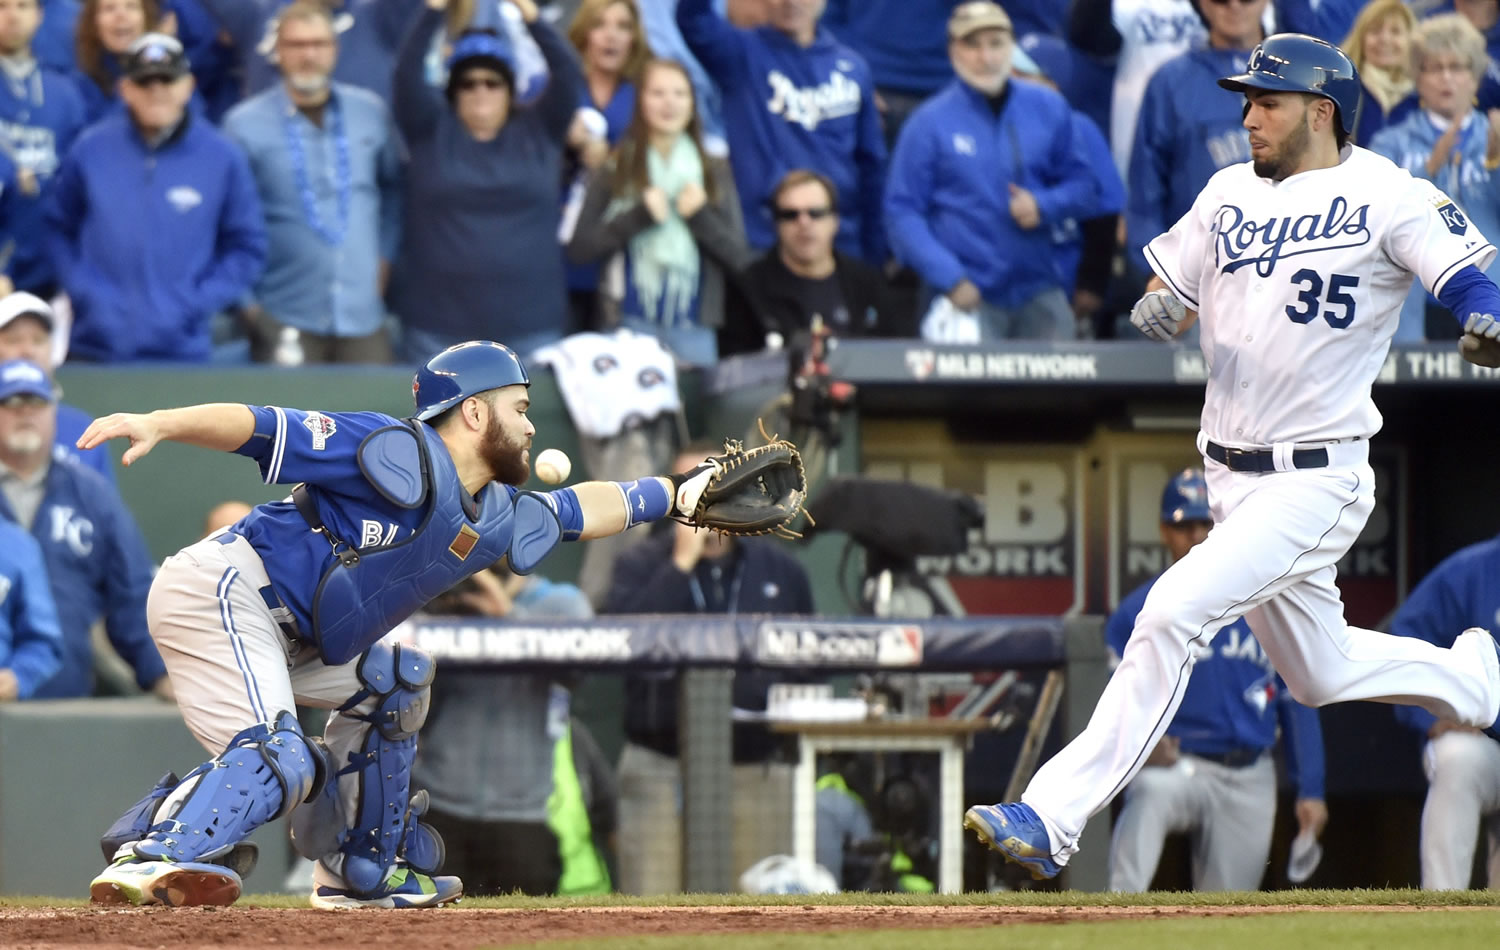 Toronto Blue Jays catcher Russell Martin misses the throw to home plate as Kansas City Royals' Eric Hosmer, right, comes in to score during the seventh inning in Game 2 of baseball's American League Championship Series, Saturday, Oct. 17, 2015, in Kansas City, Mo.